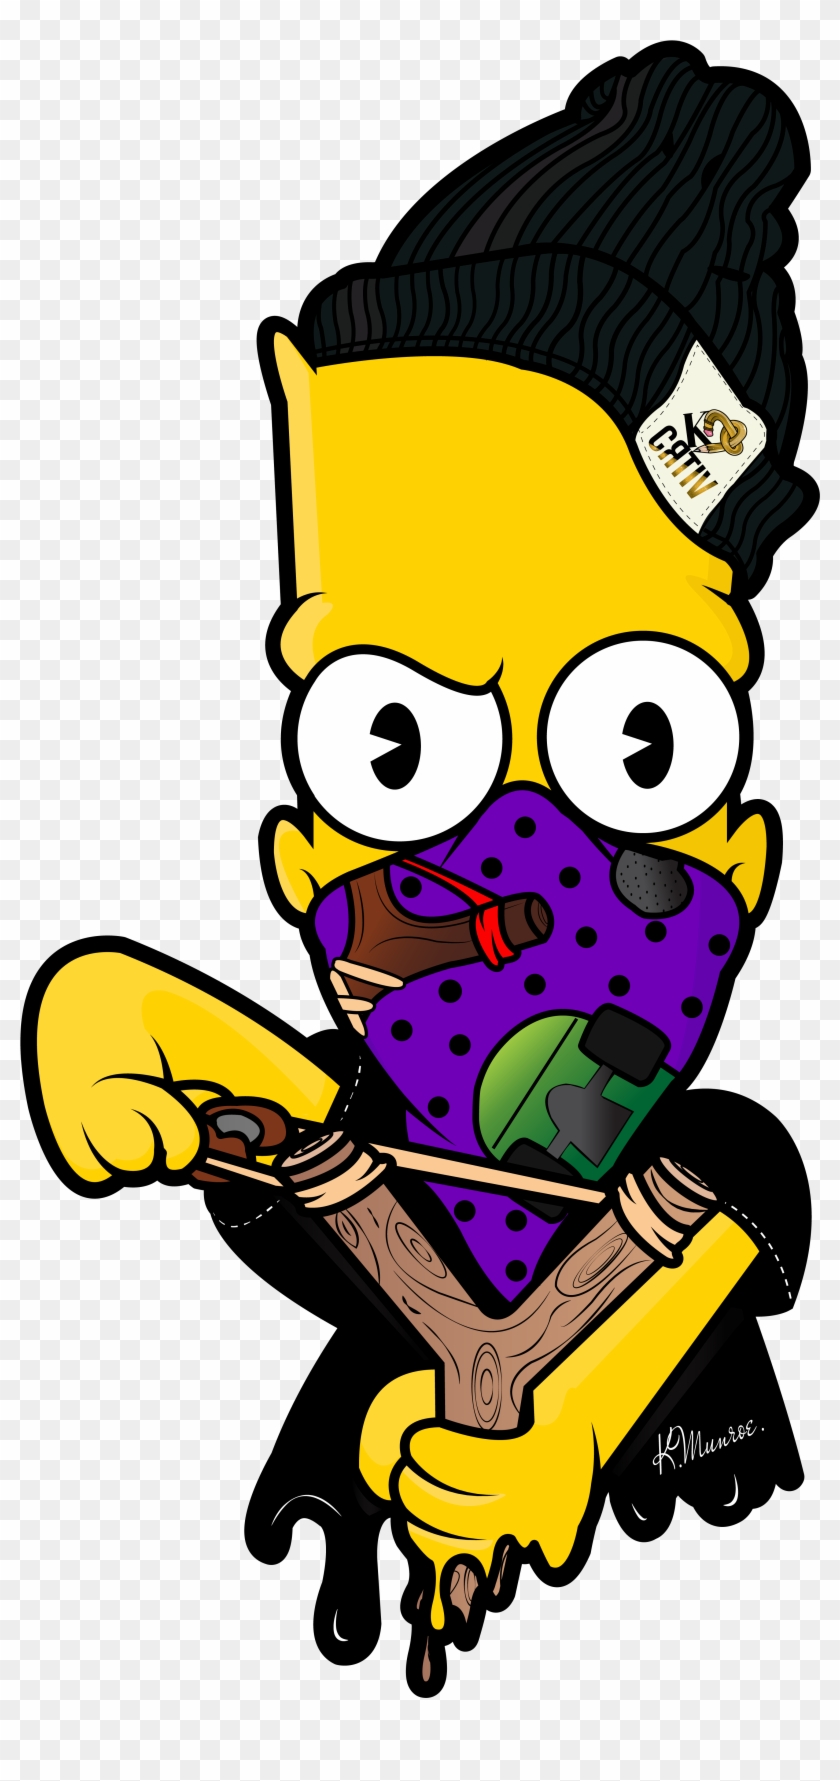 Bart simpson images in collection page png bart simpson